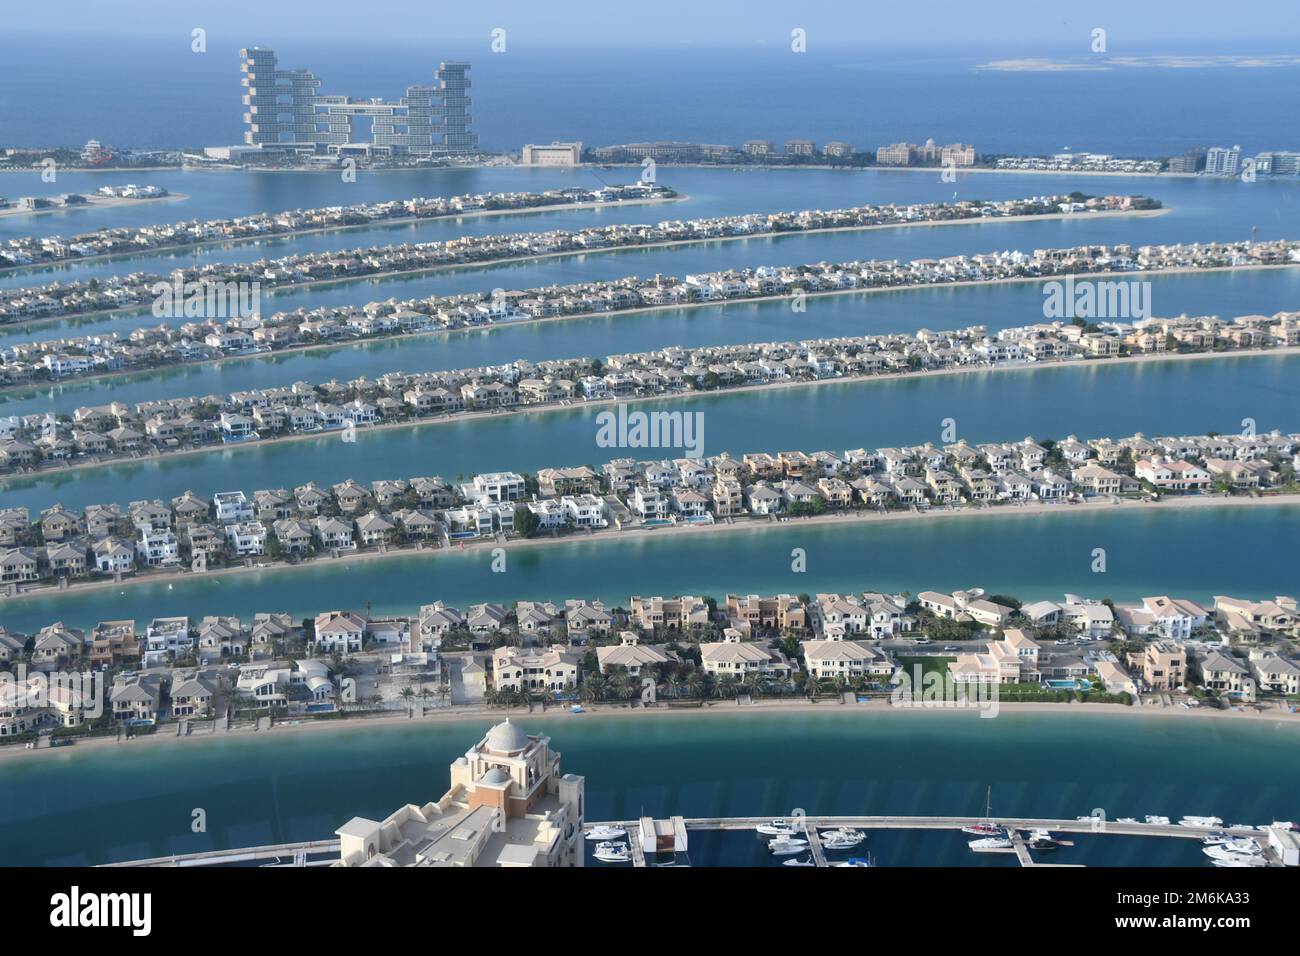 The view of Palm Jumeirah from the observation deck at Palm Tower (St Regis Hotel) in Dubai, UAE Stock Photo